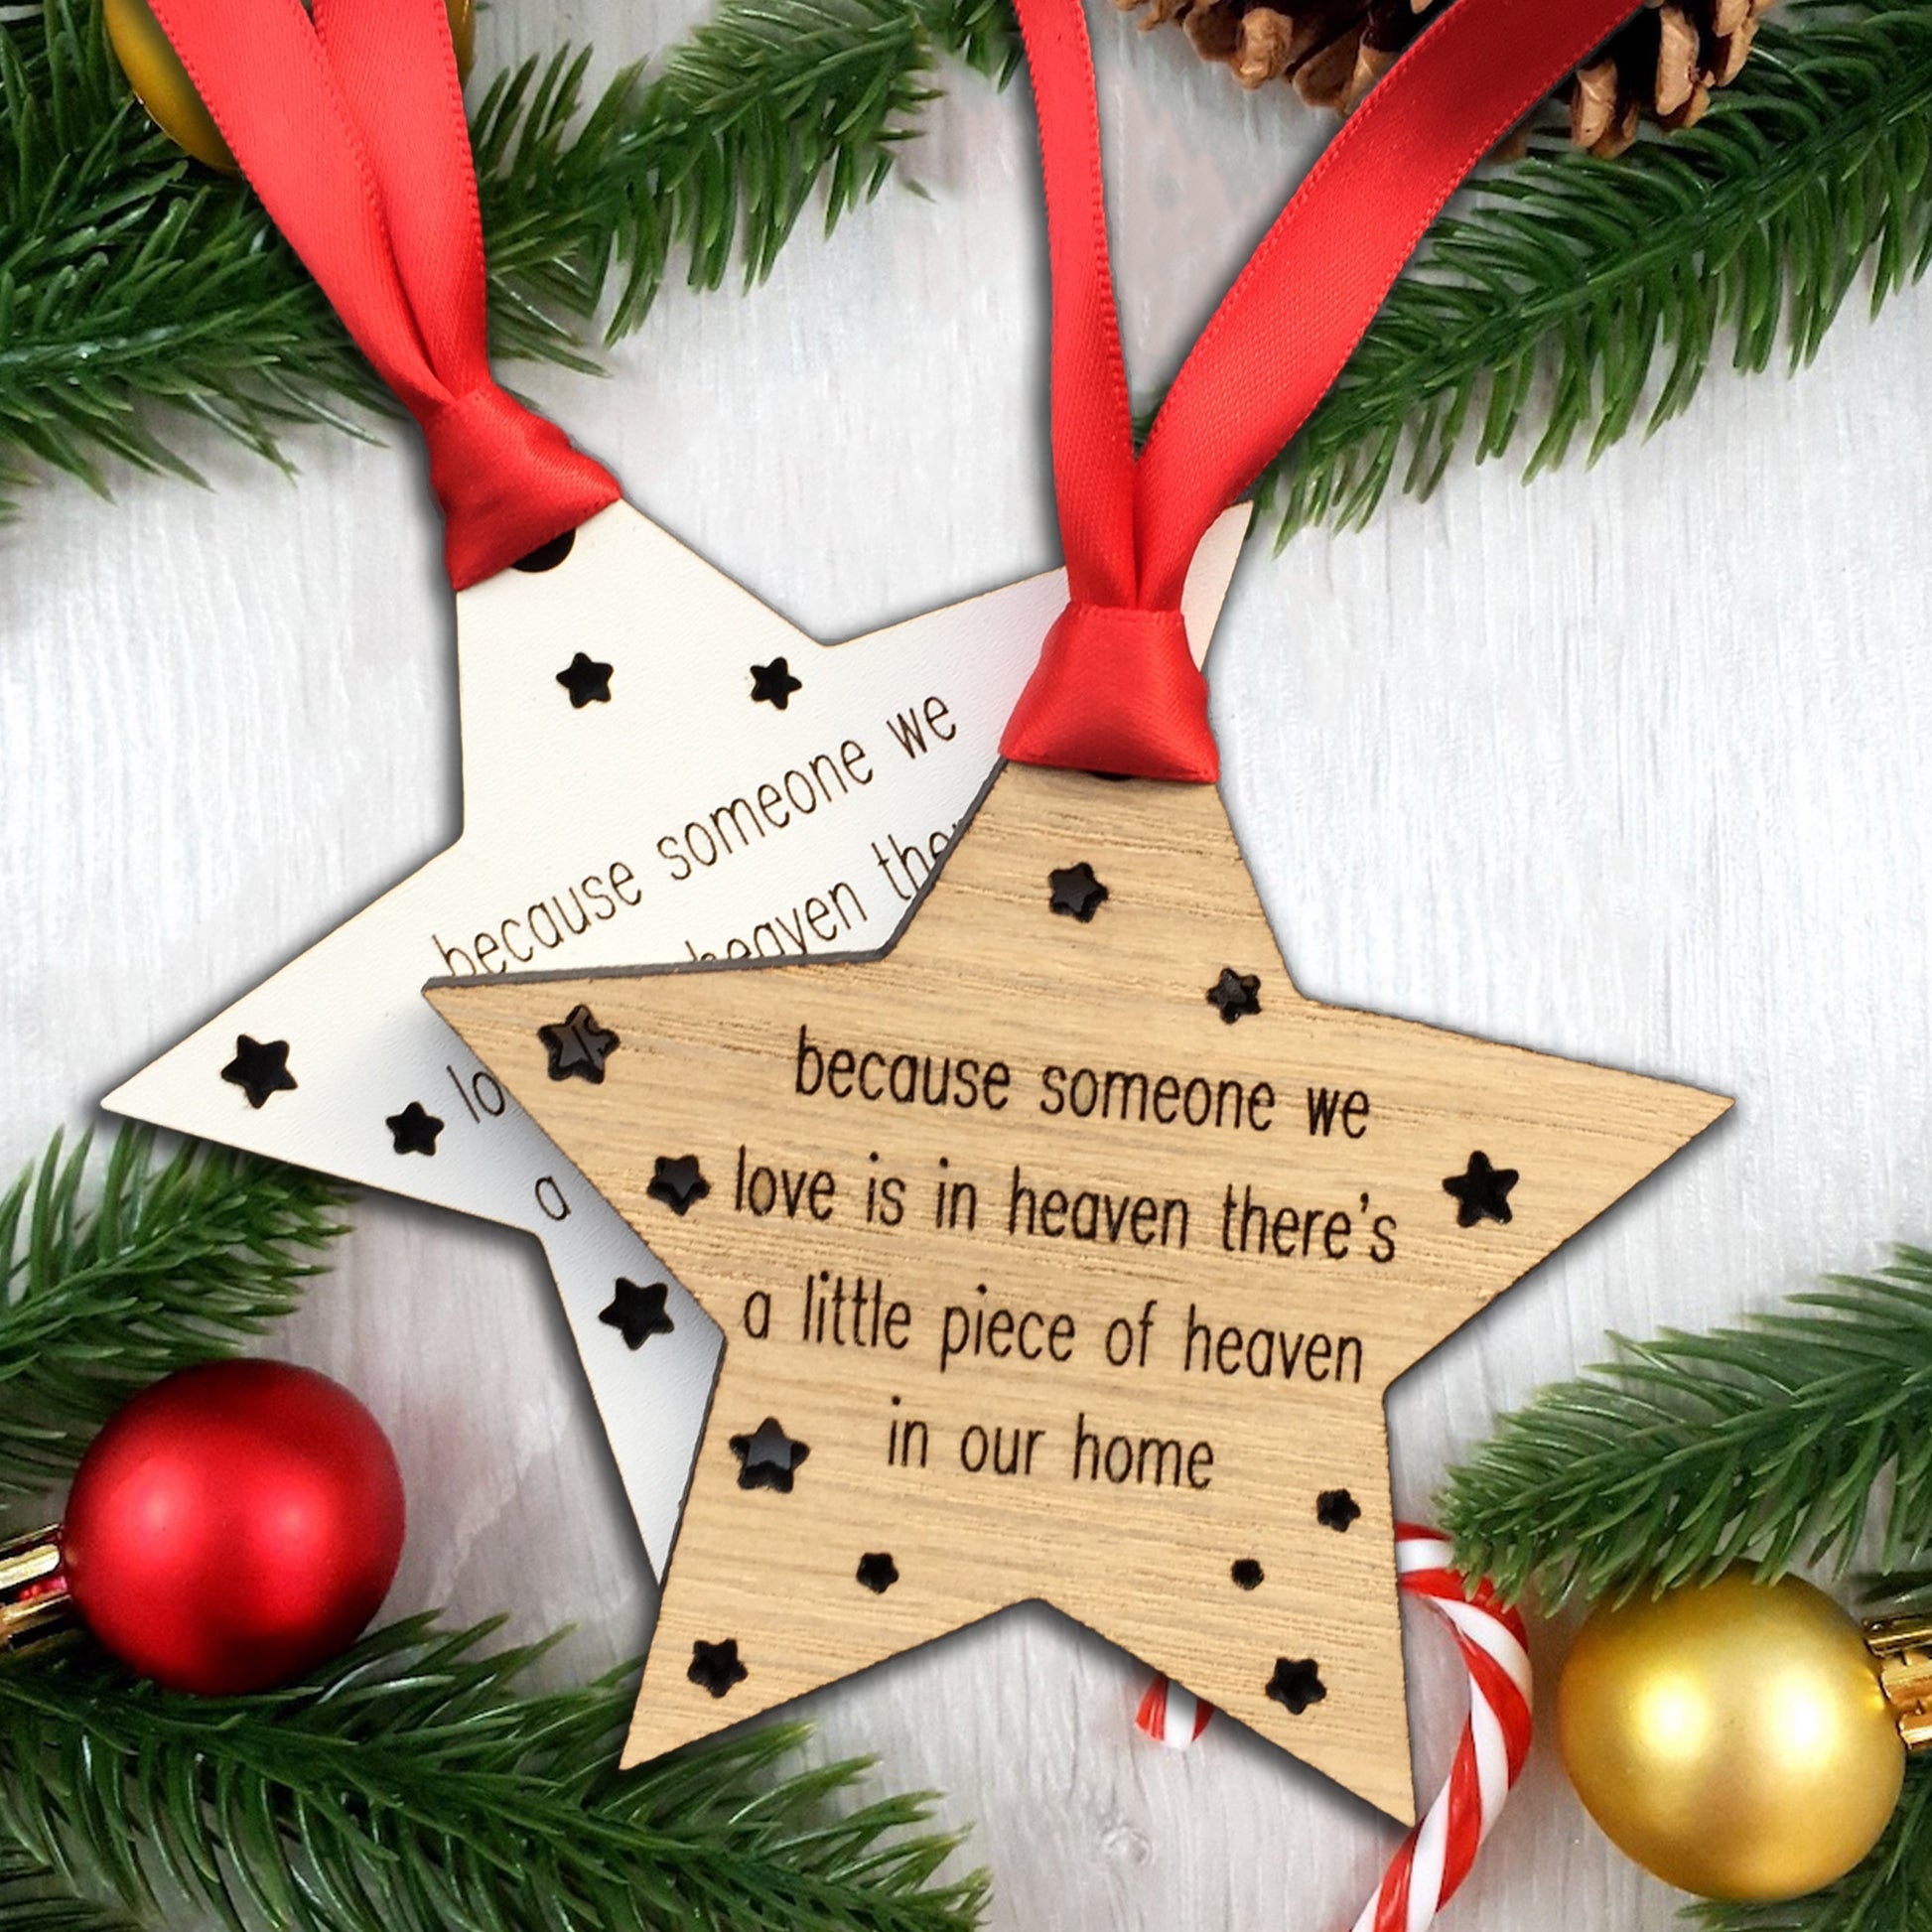 Heaven Star Bauble - Wooden Christmas Tree Decoration